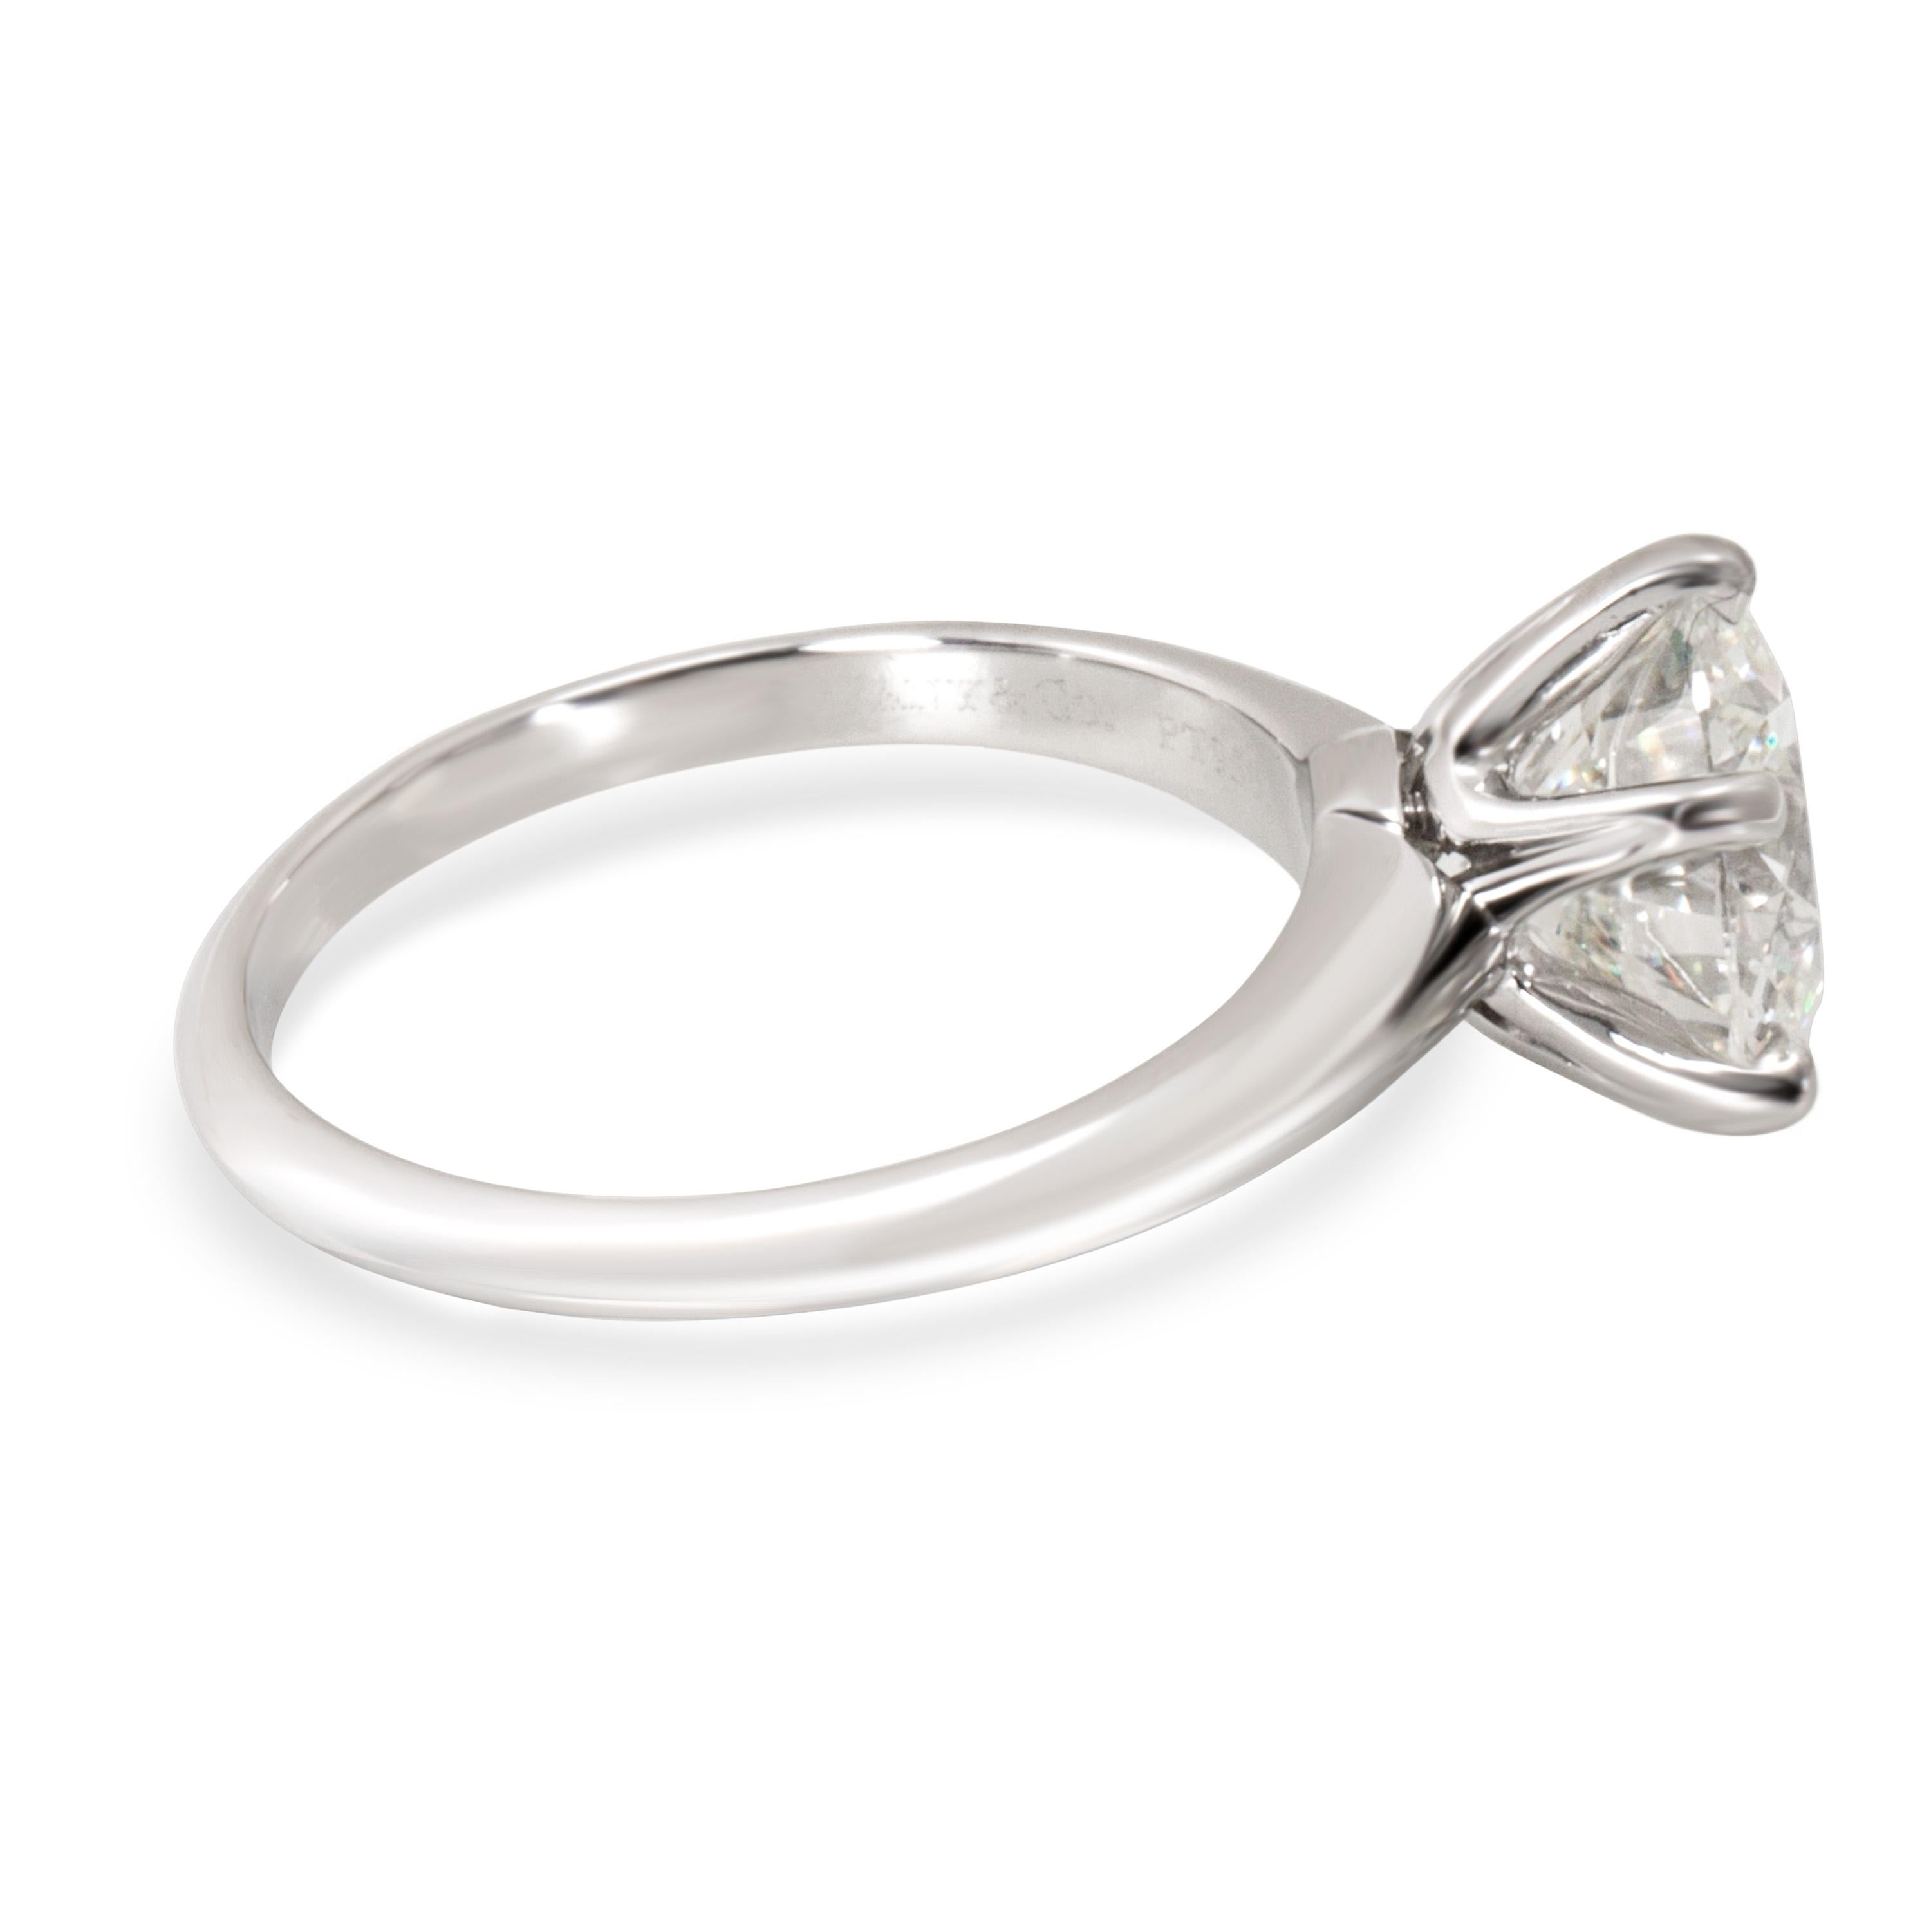 Modern Tiffany & Co. Diamond Solitaire Engagement Ring in Platinum 2.31 Carat